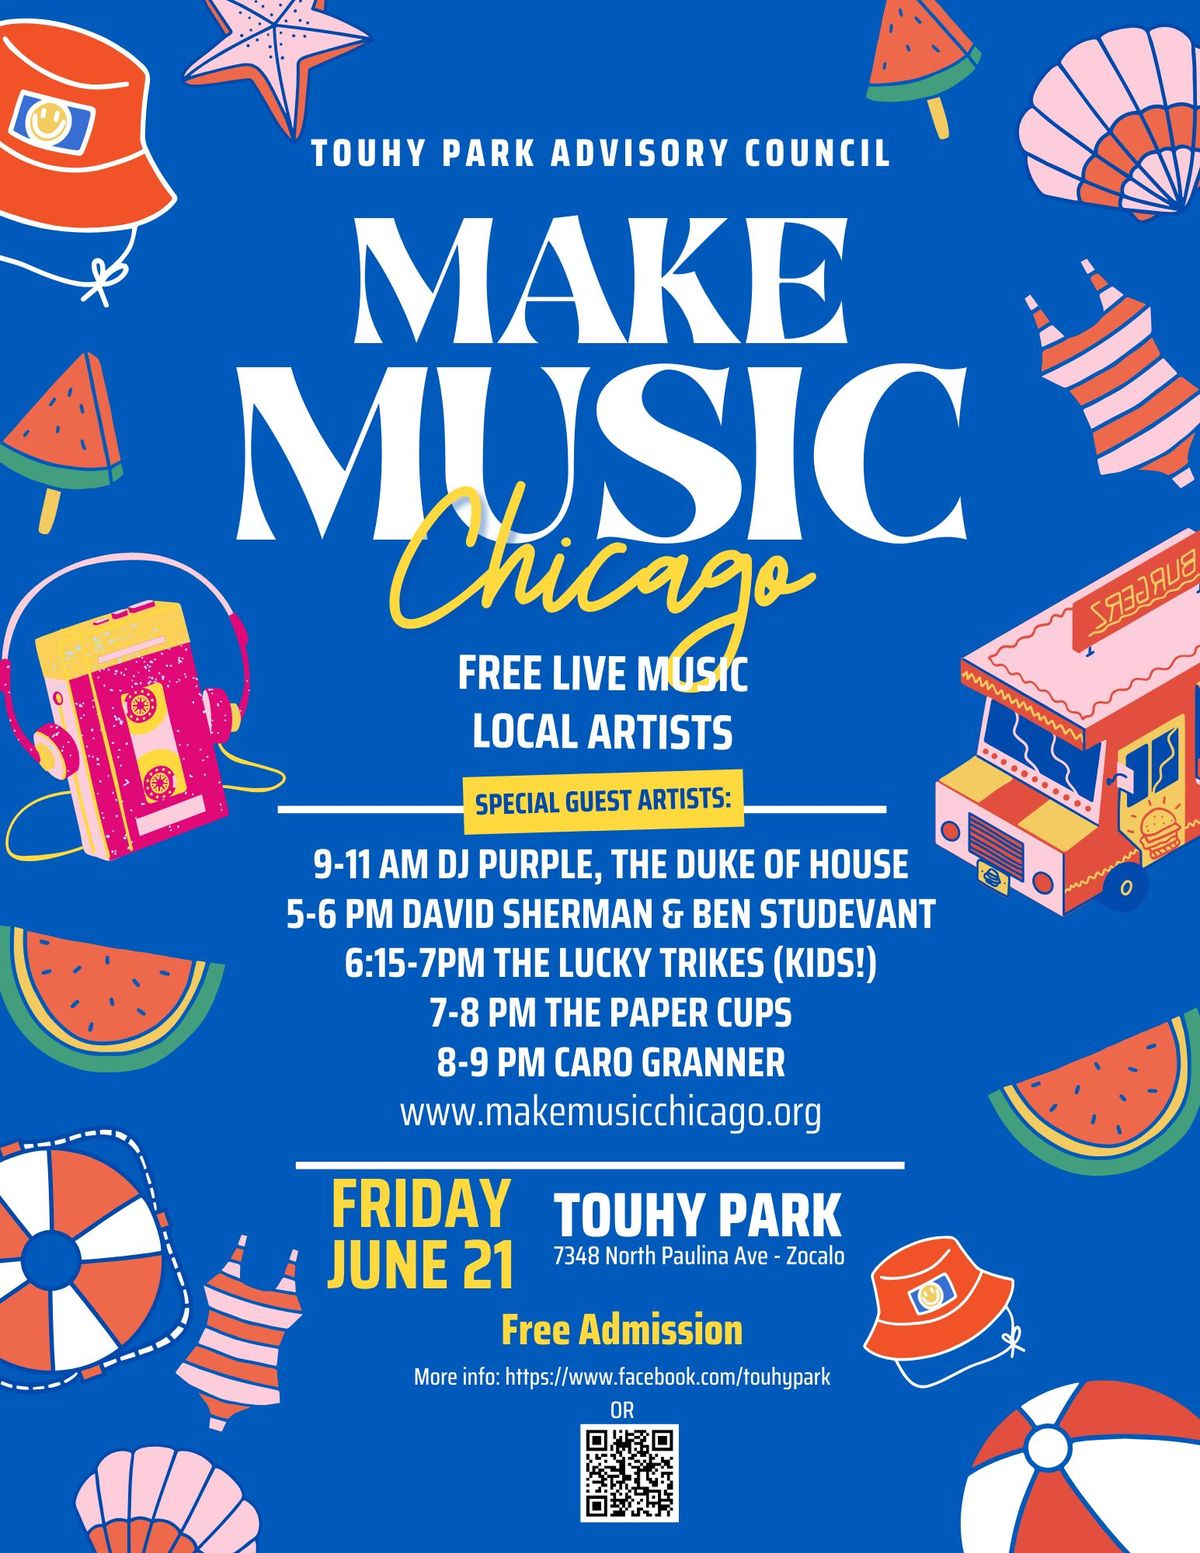 Make Music Chicago @Touhy Park